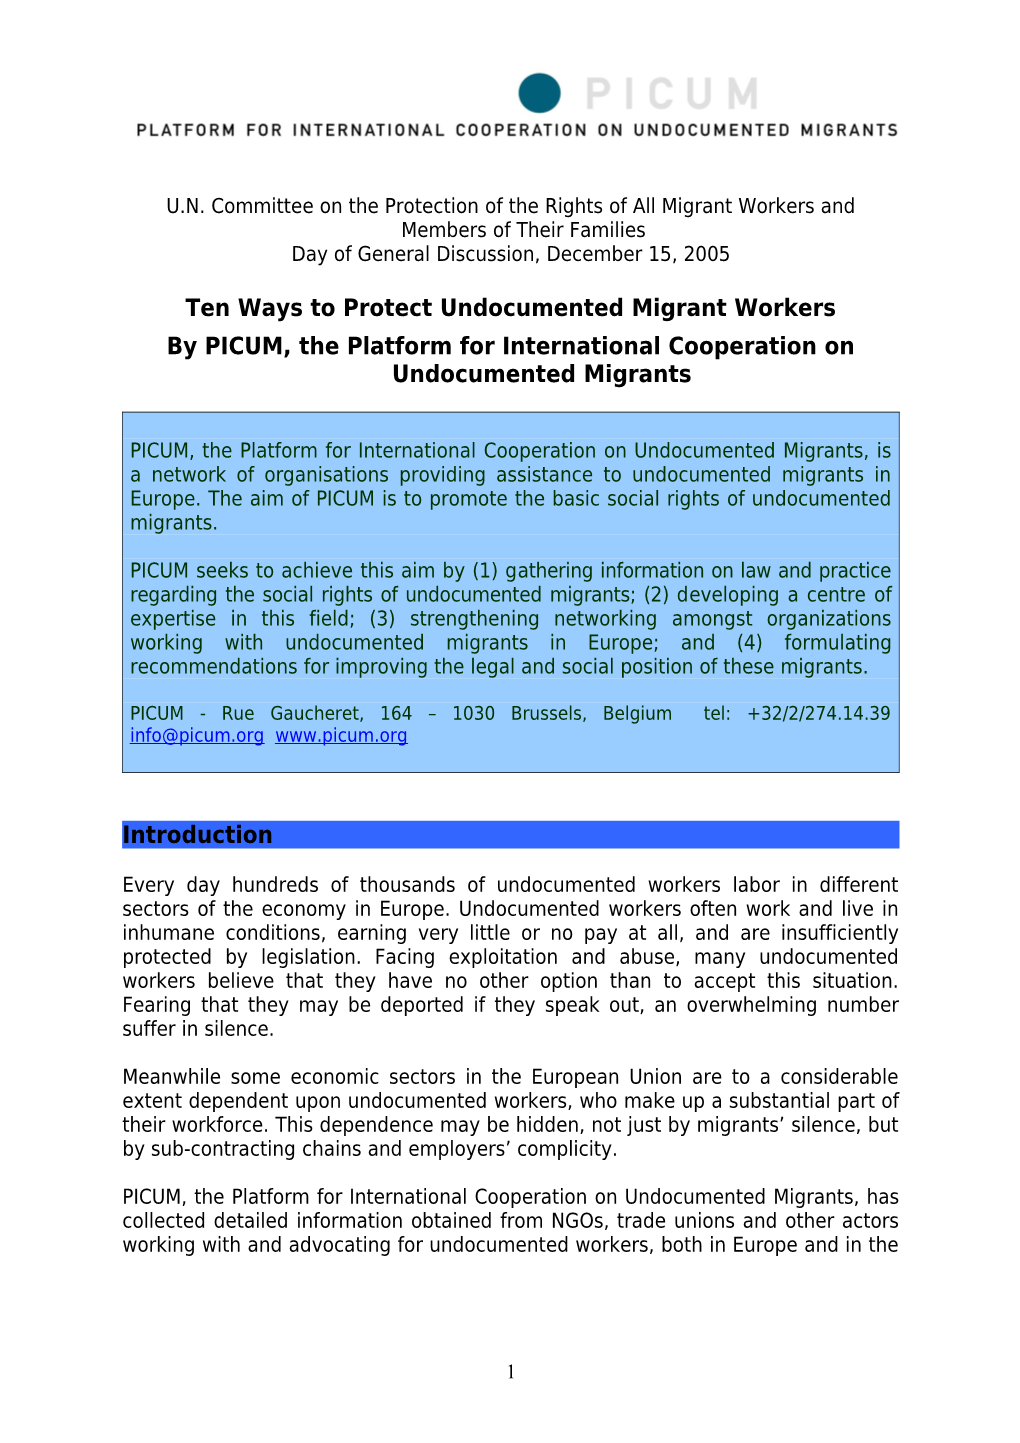 U.N. Committee on the Protection of the Rights of All Migrant Workers and Members of Their